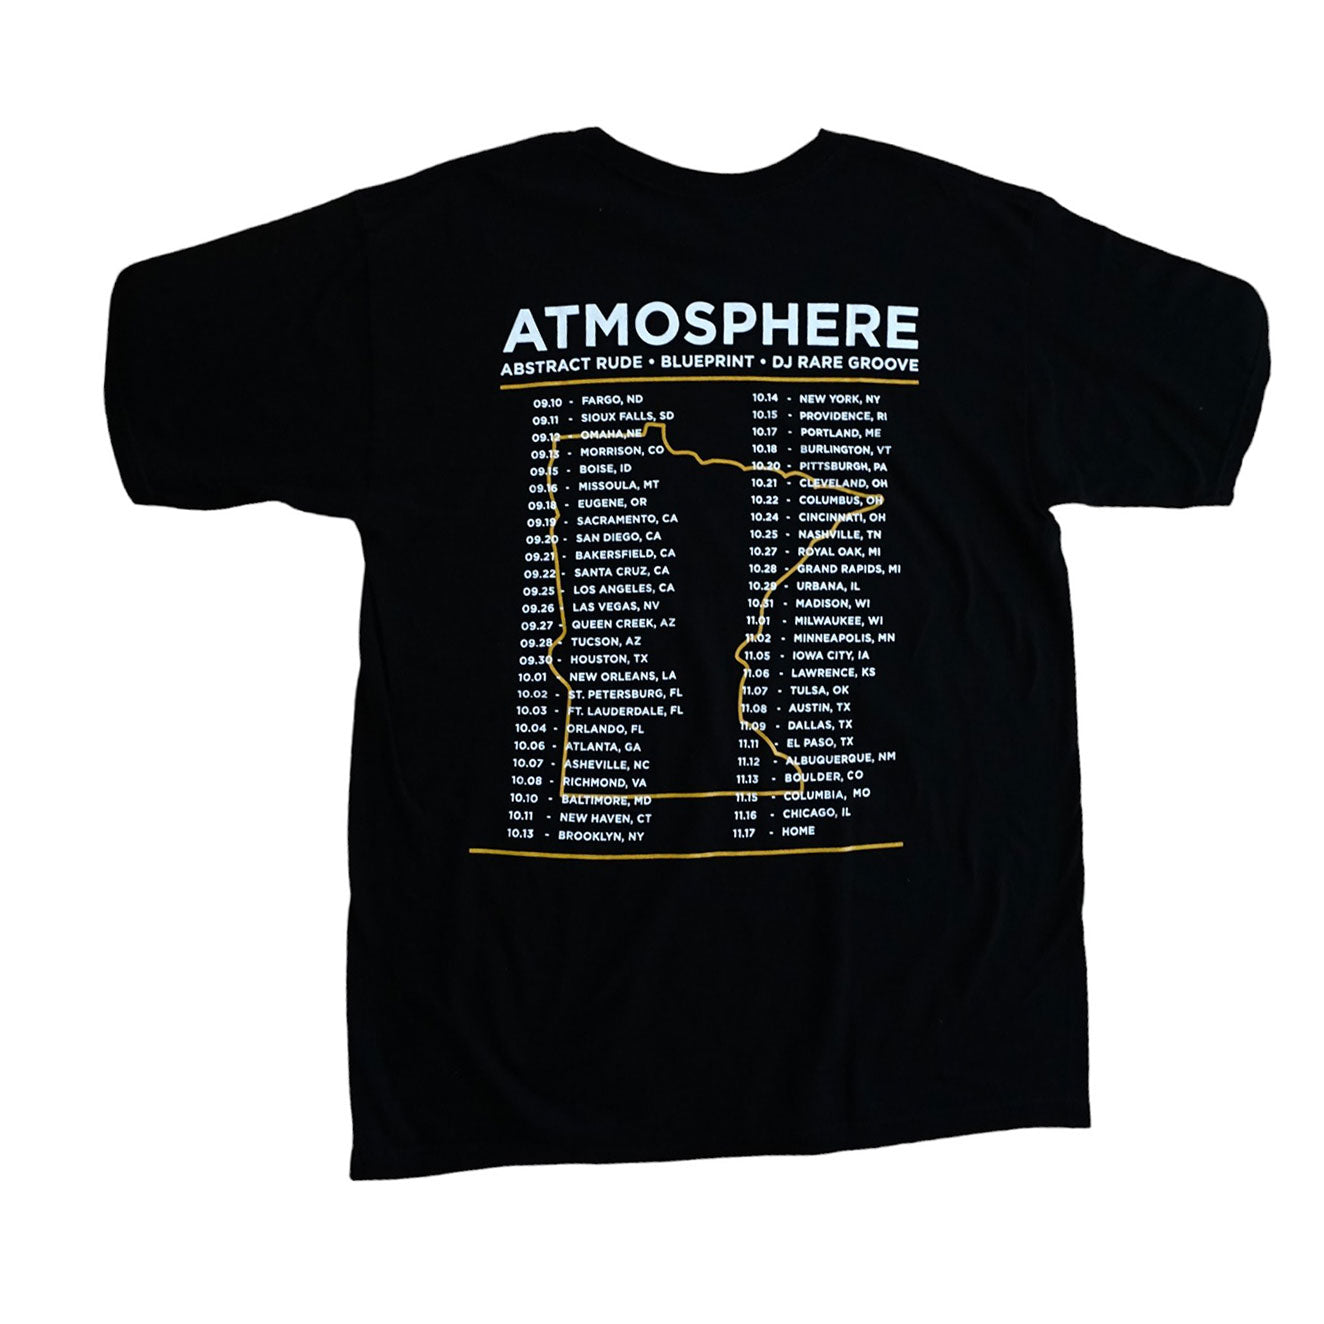 Used to Love - Atmosphere Paint The Nation Vintage Tour Tee